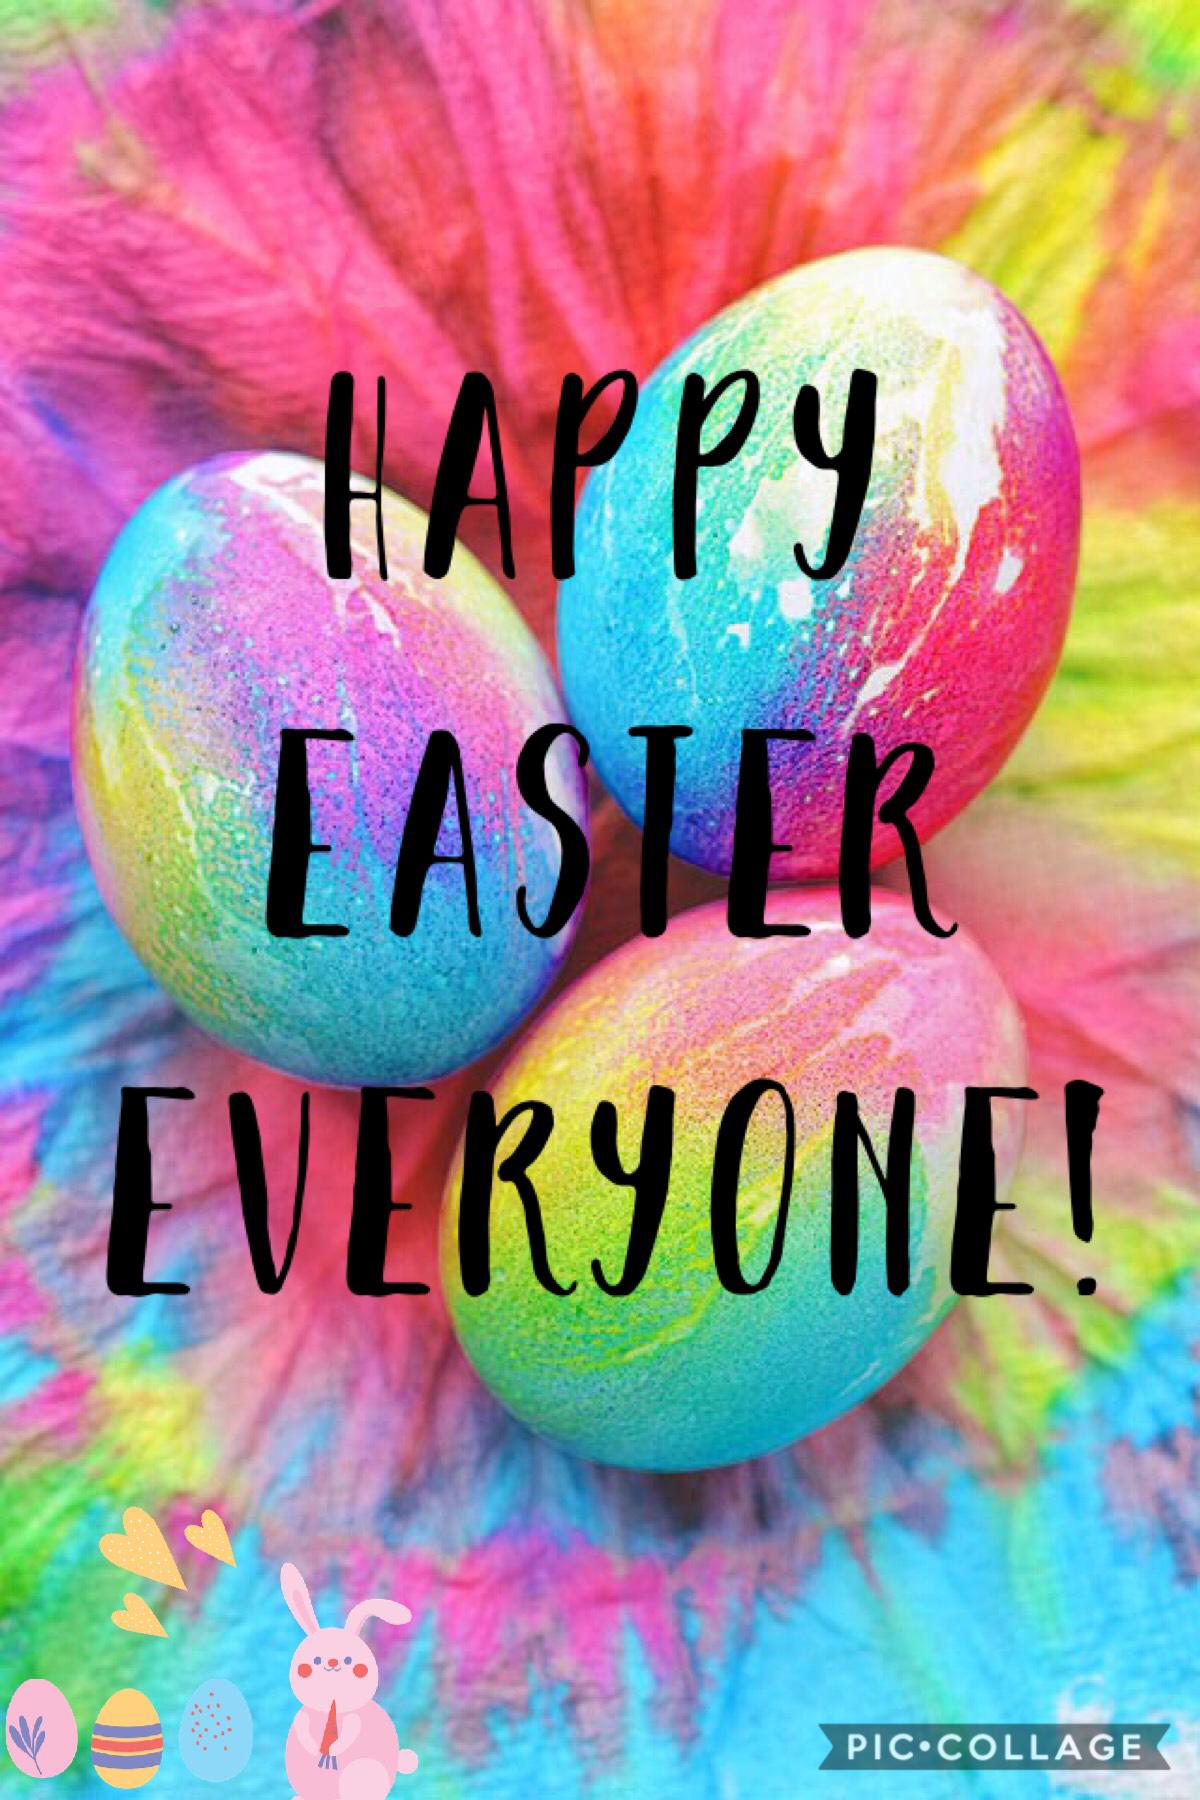 Tap

Happy Easter! Have a great day! Please check out my other account @Sirina_Grace_RP if you want to role play with me 